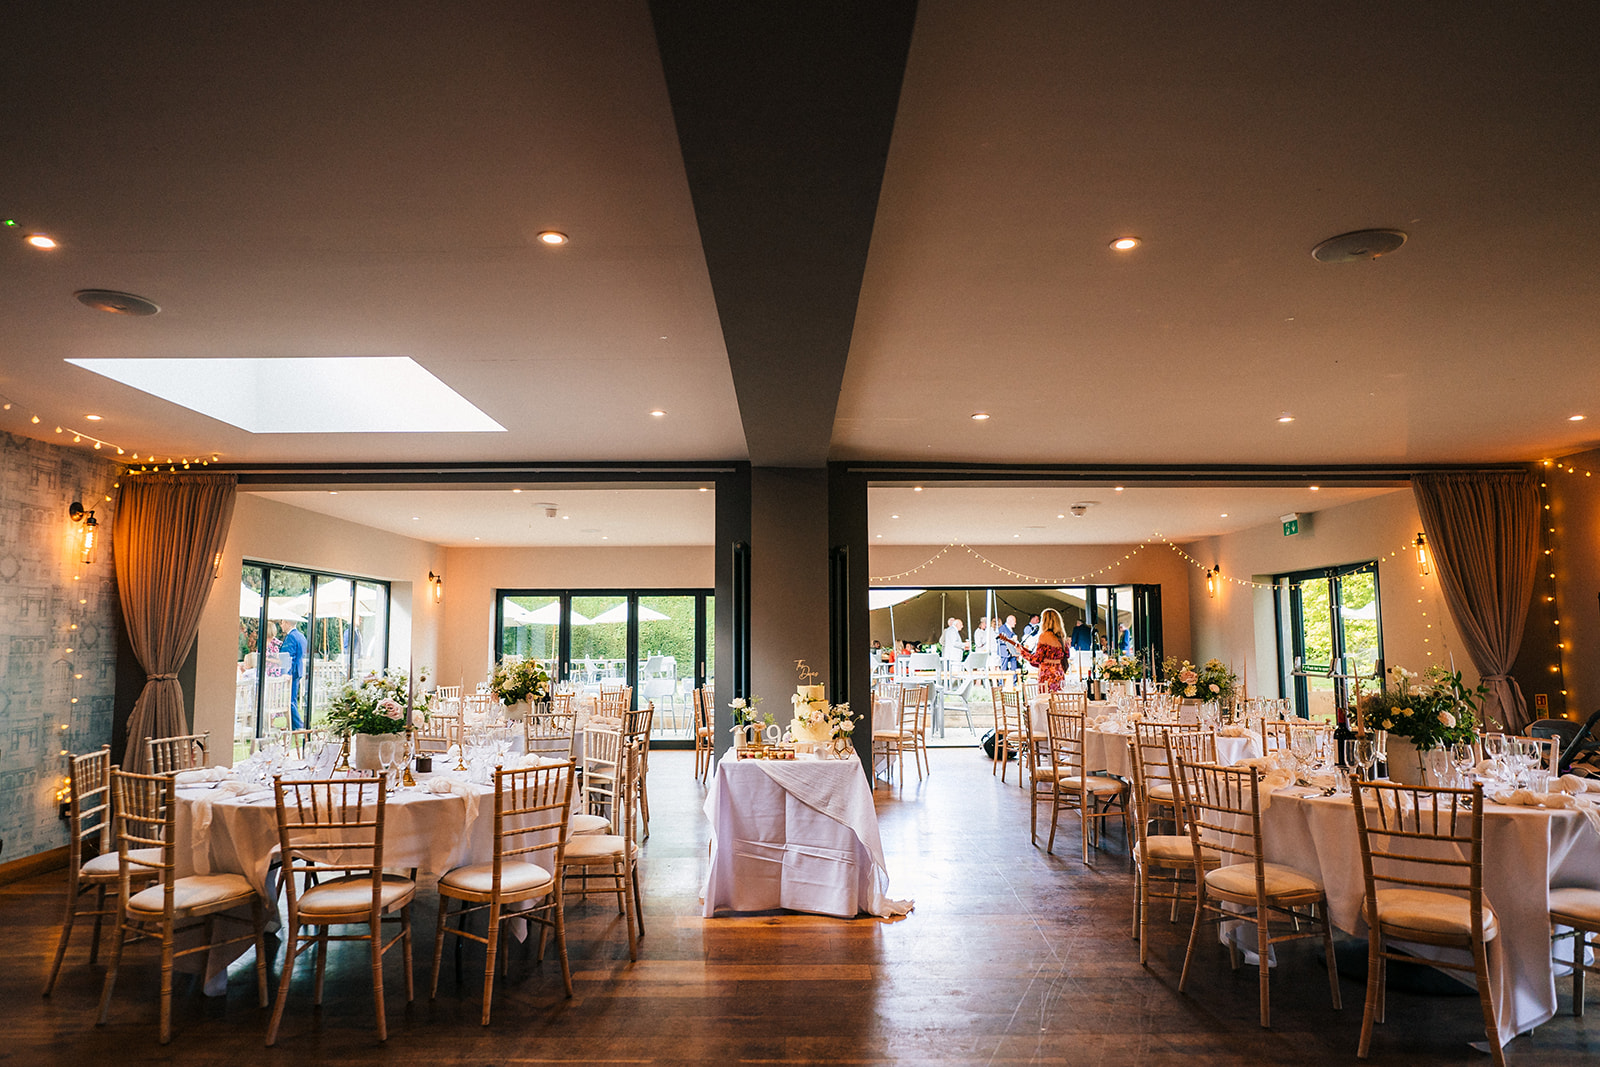 The Chequers Inn Wedding Photography - a photo showing the inside of the wedding breakfast room